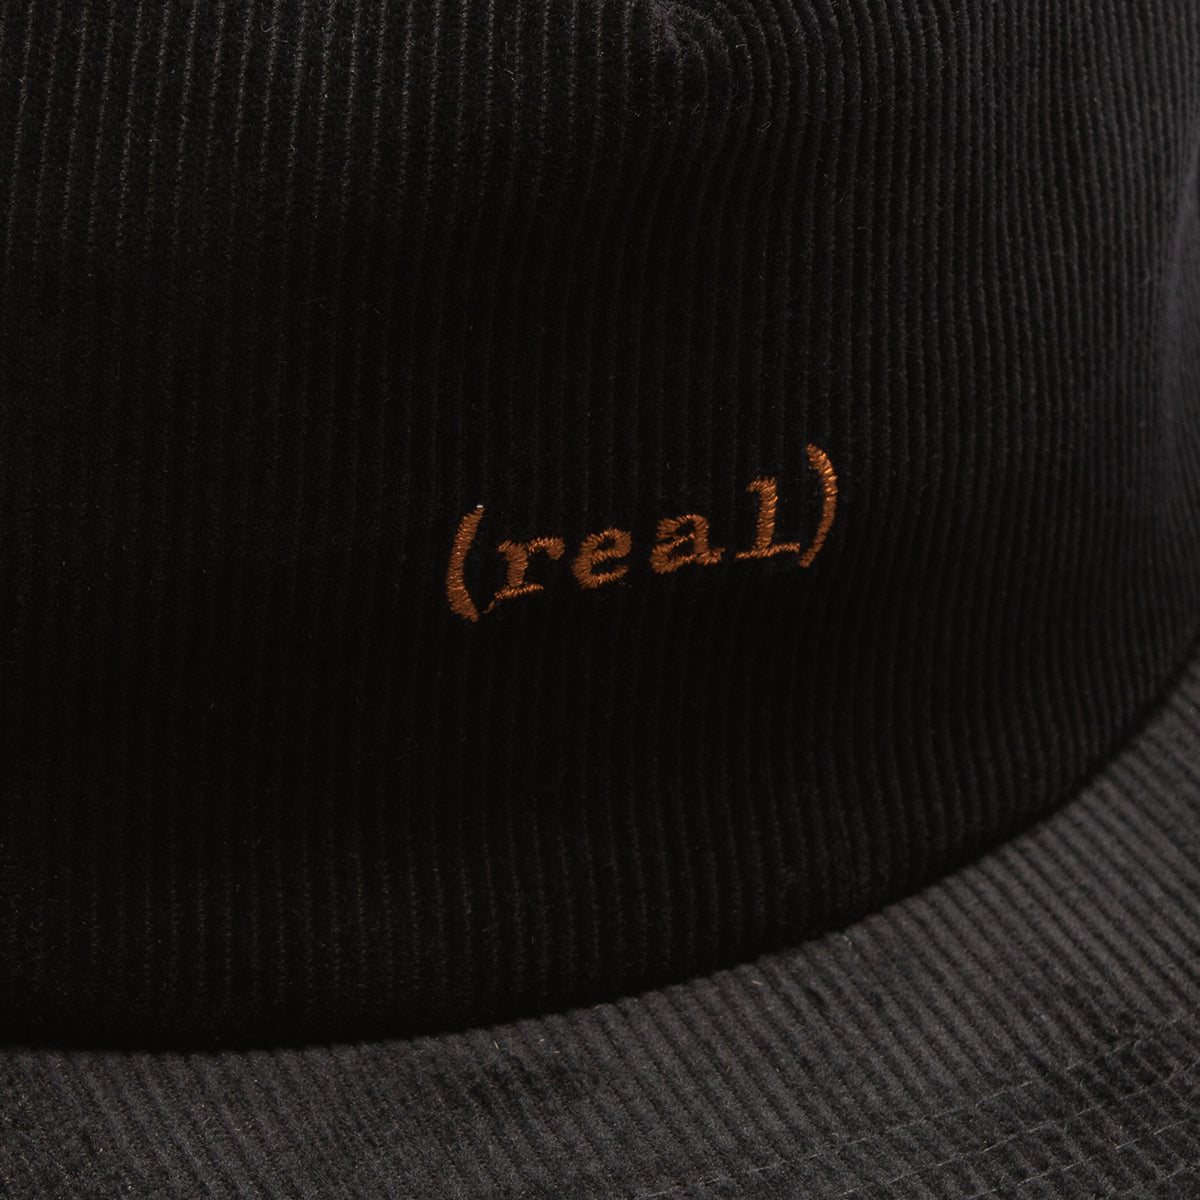 Real | Lower Hat Color : Black / Rust